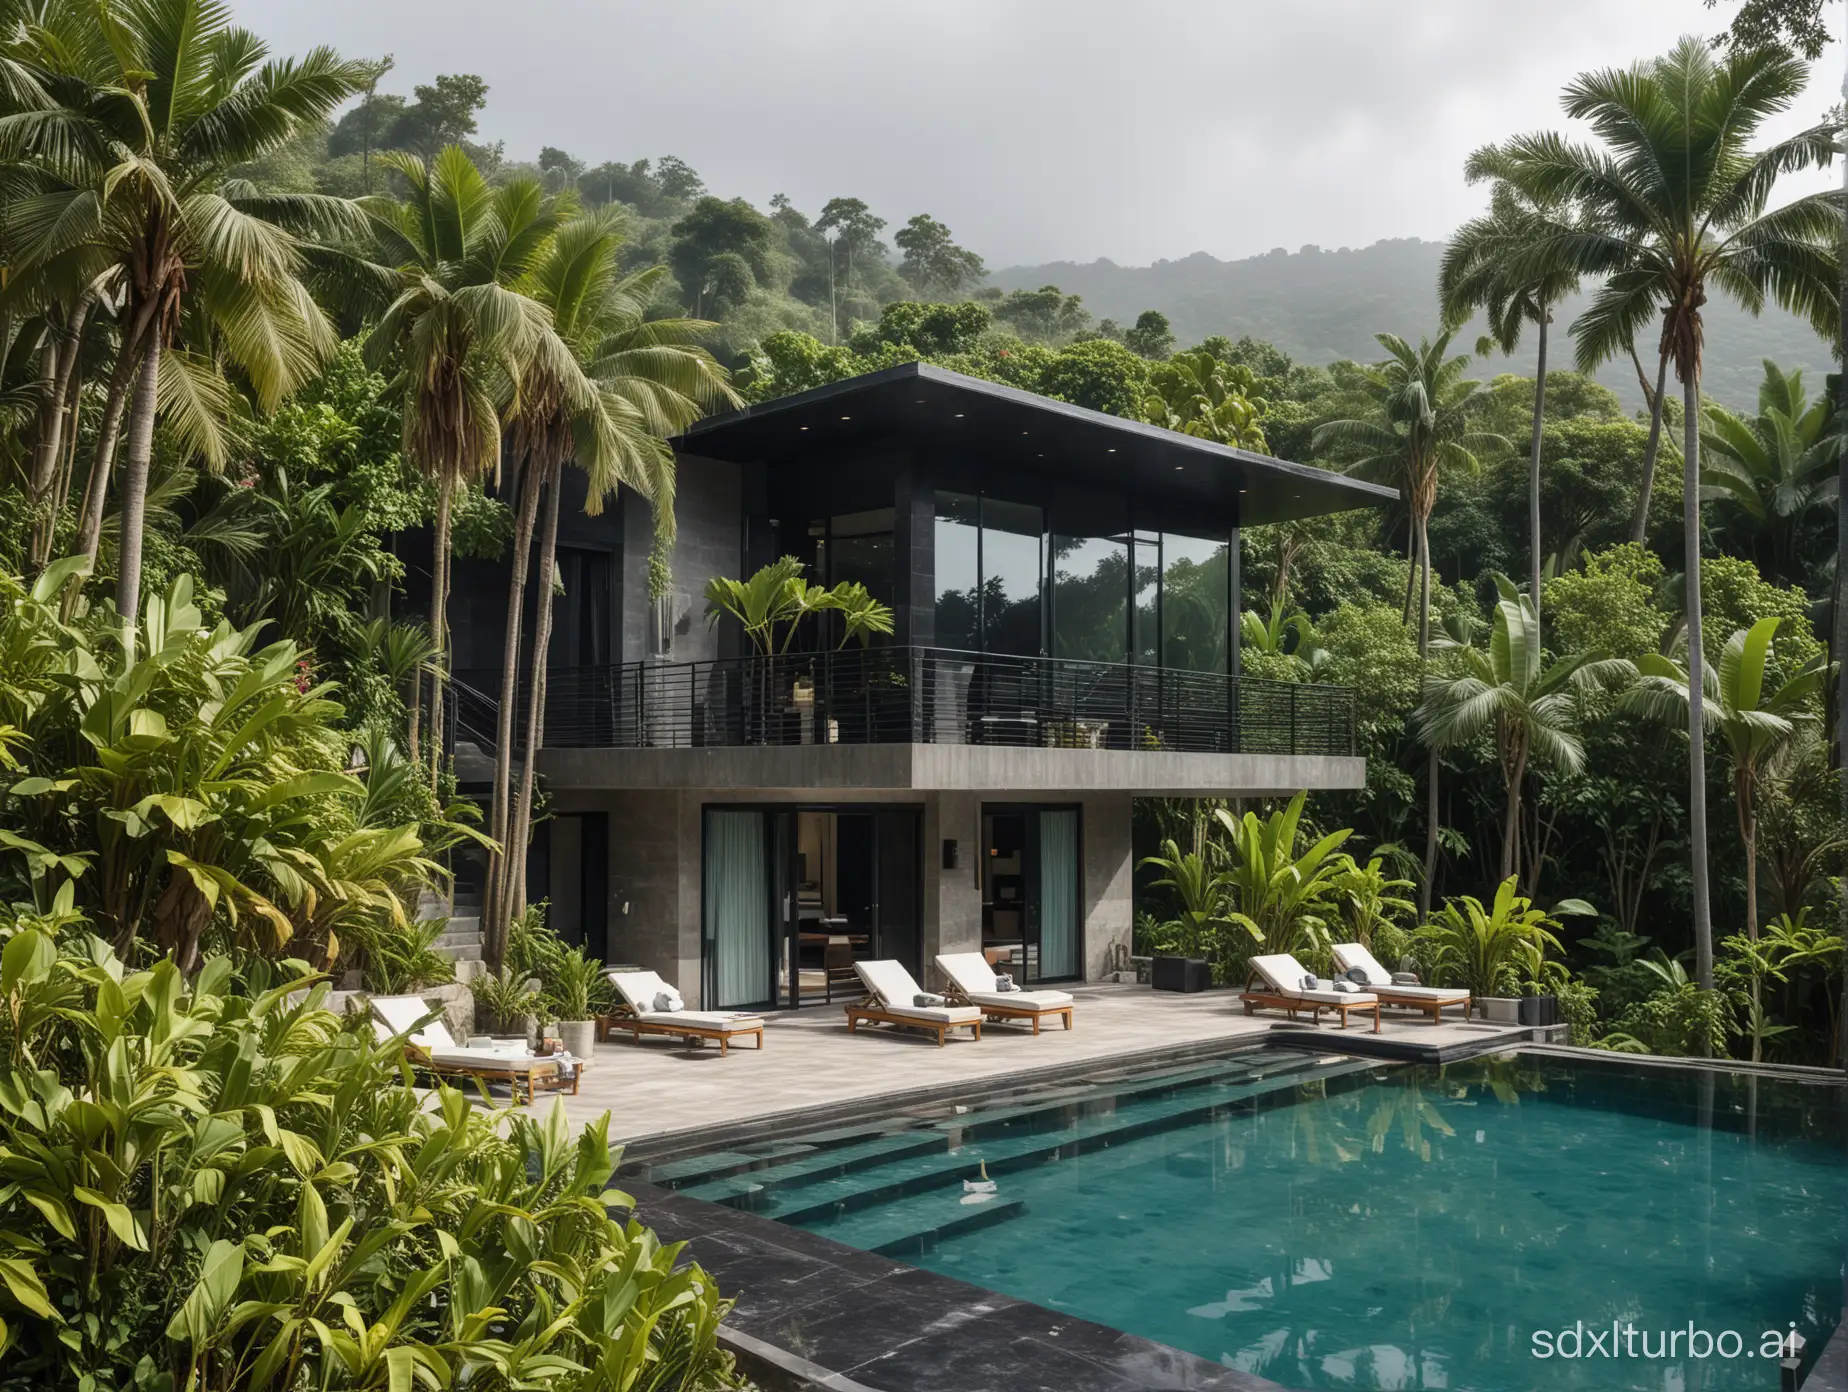 On the sloping slope by the sea, with dense vegetation, there is a standalone villa, the villa style is simple and bright, with a black marble exterior wall. There is a swimming pool in front of the hotel balcony, with two lounge chairs and a black sofa next to the pool. There are small banana trees and other tropical plants around the hotel. Facing the hotel is a vast ocean, with heavy rain and mist.